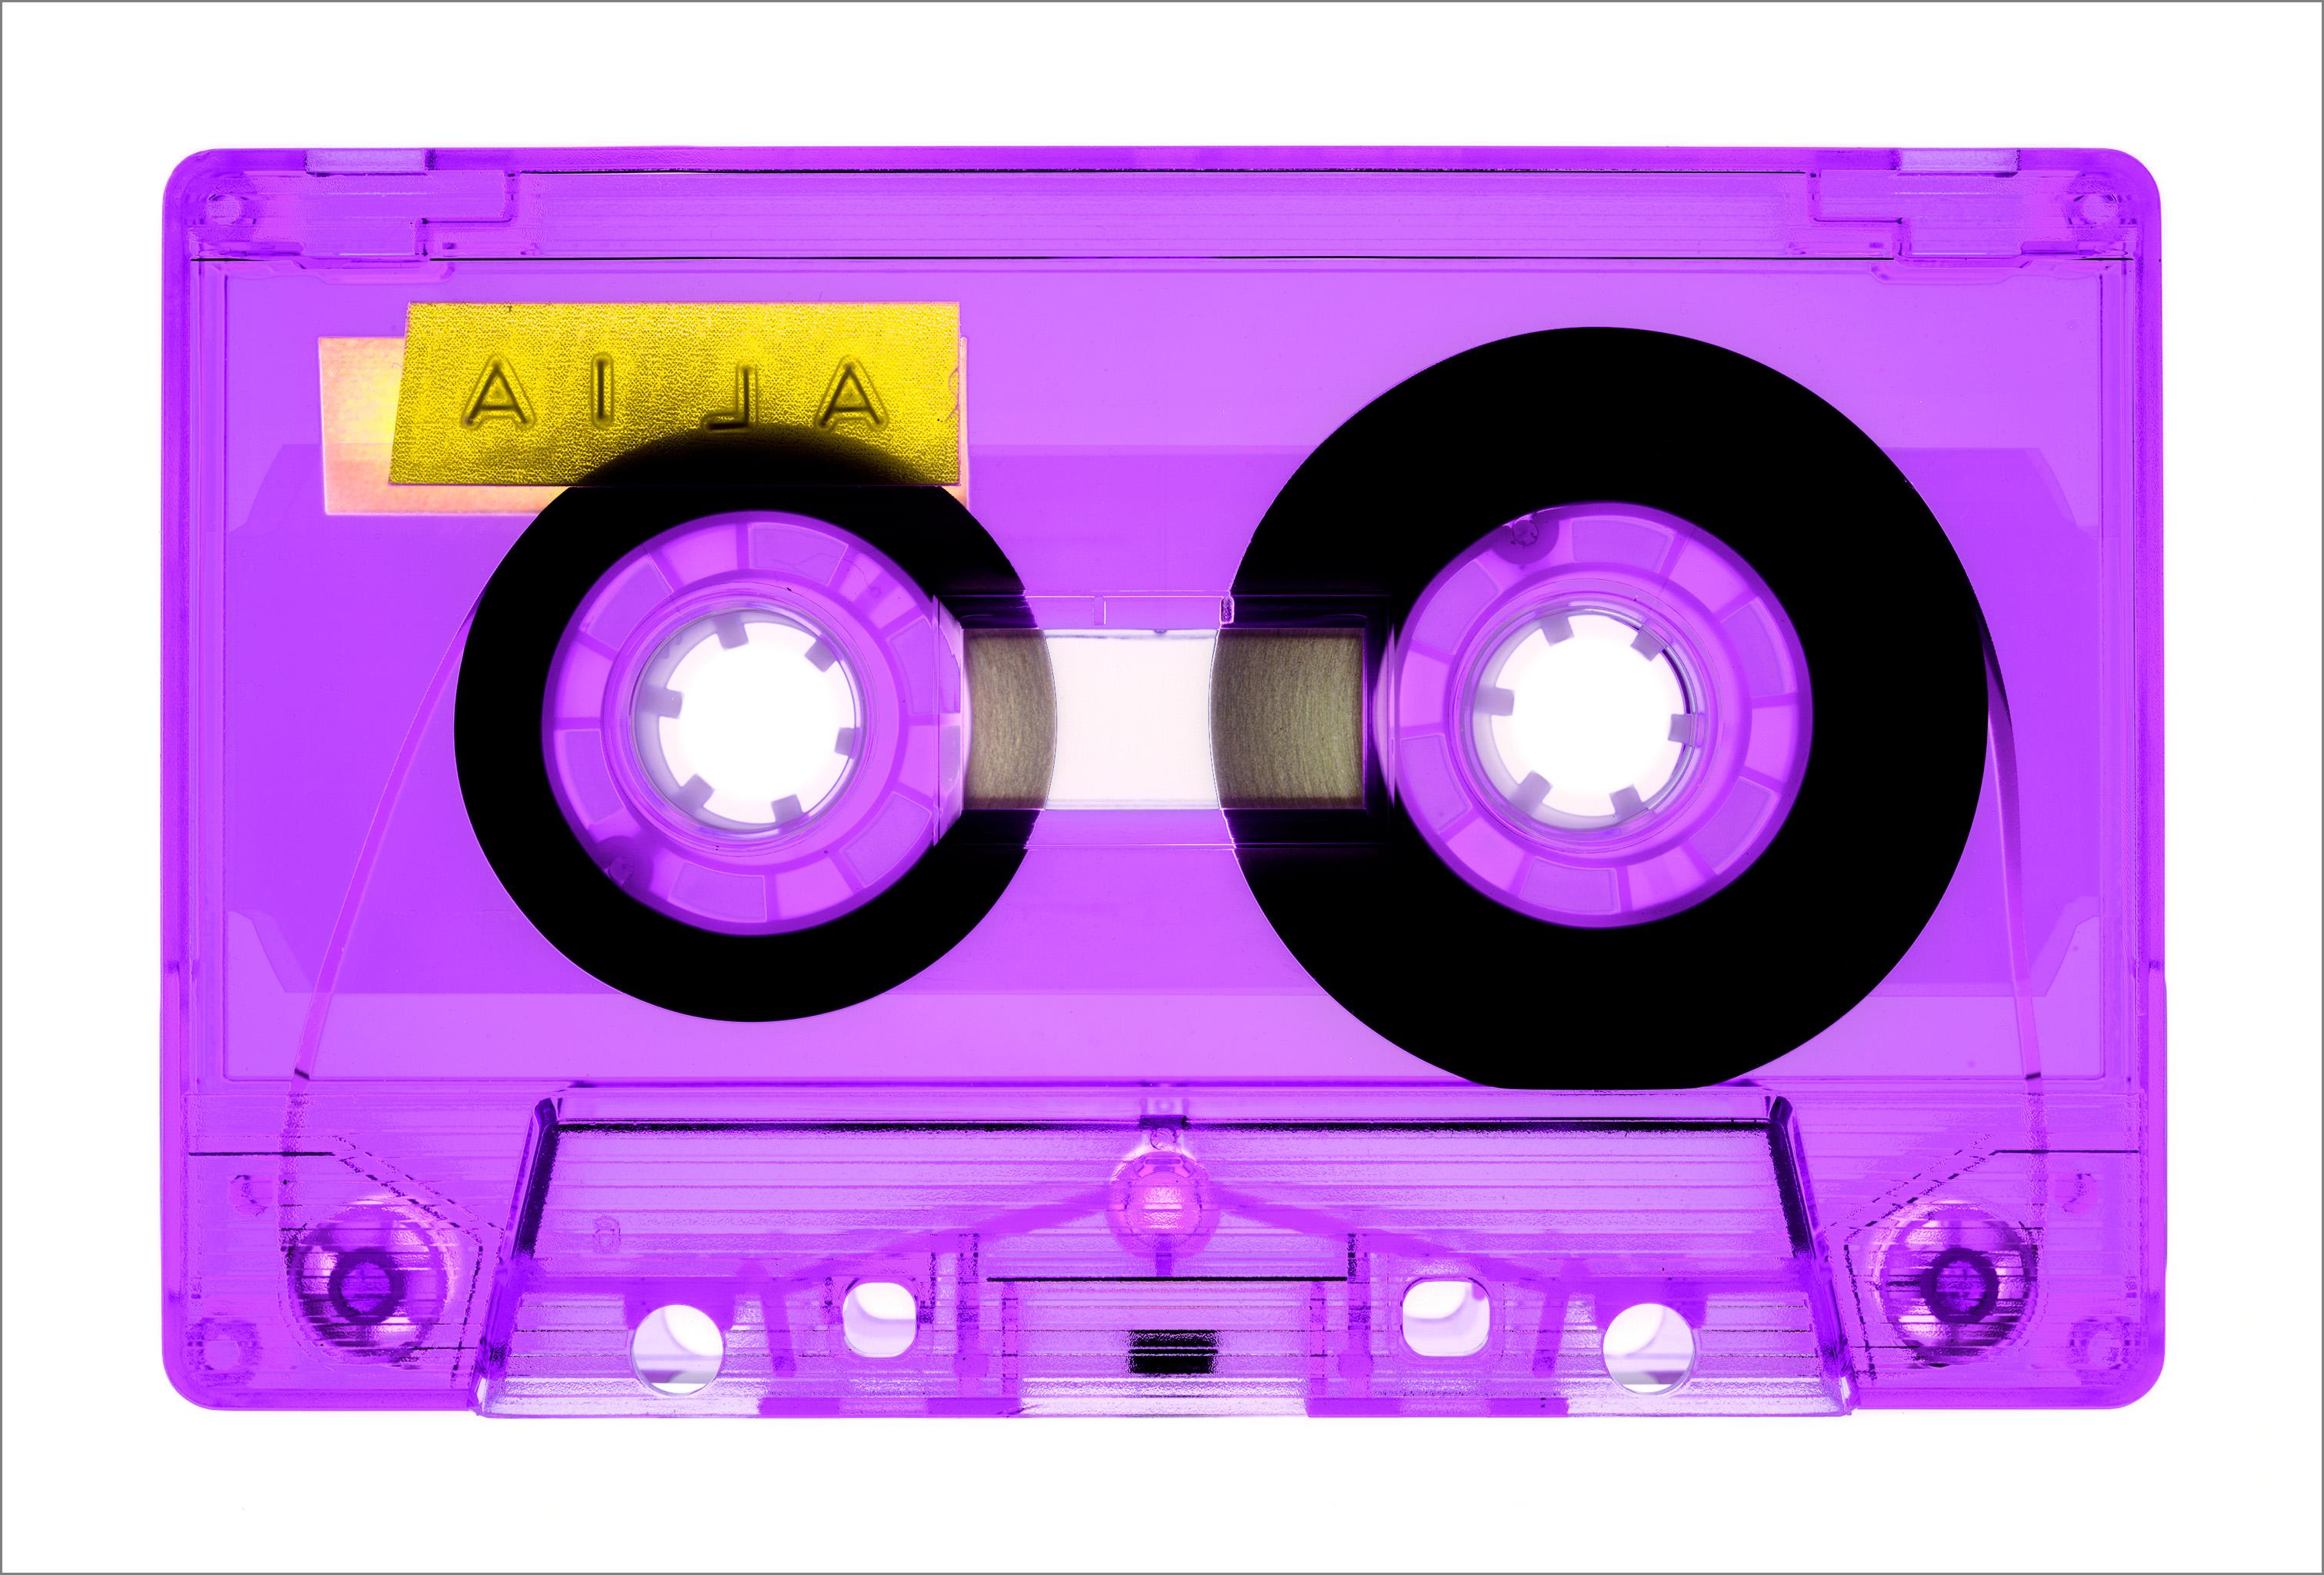 Heidler & Heeps Print - Tape Collection, AILA Lilac - Contemporary Pop Art Color Photography